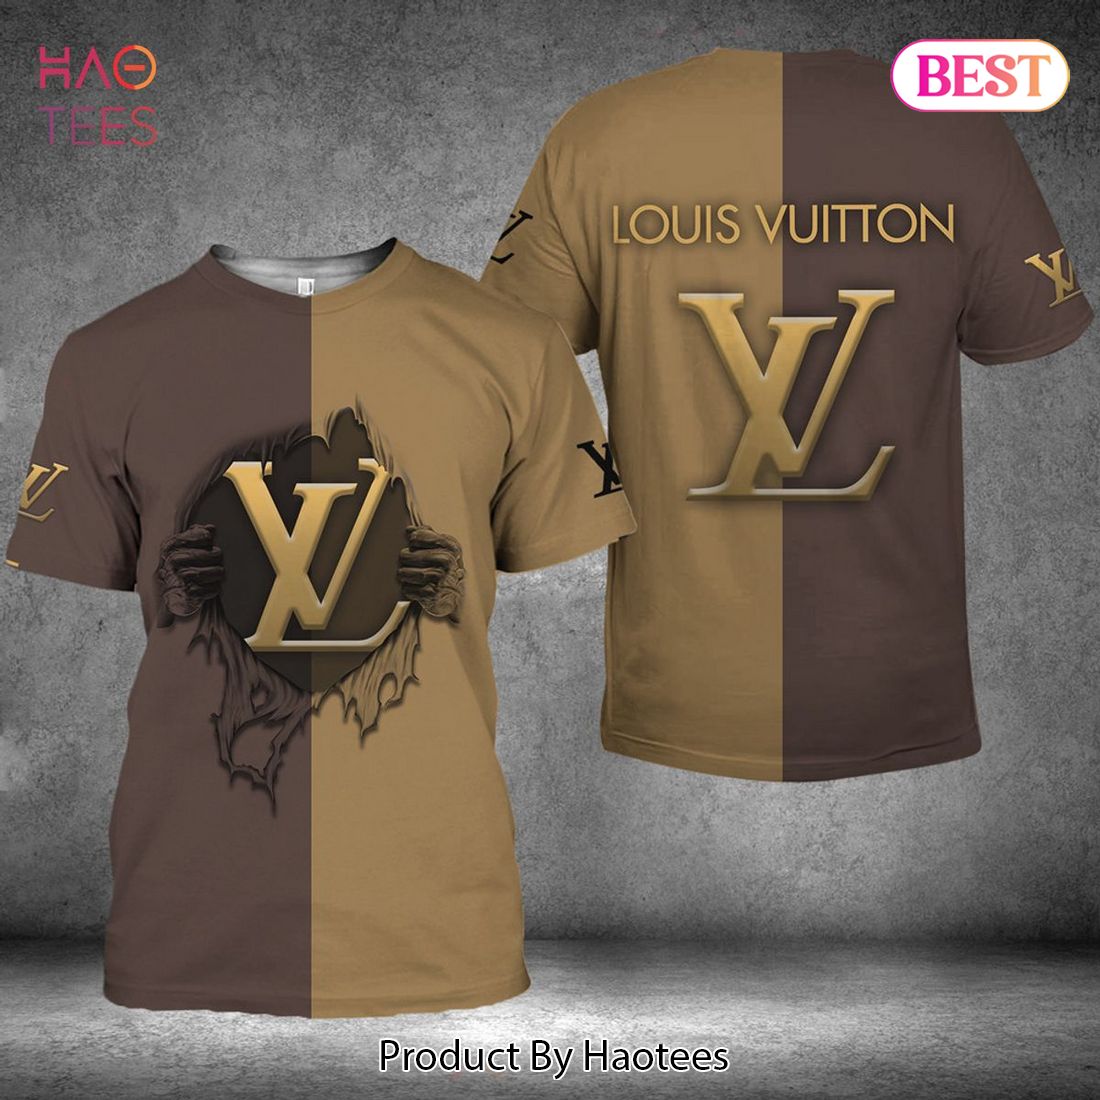 THE BEST Louis Vuitton Grey Mix Brown Luxury Brand 3D T-Shirt Limited Edition